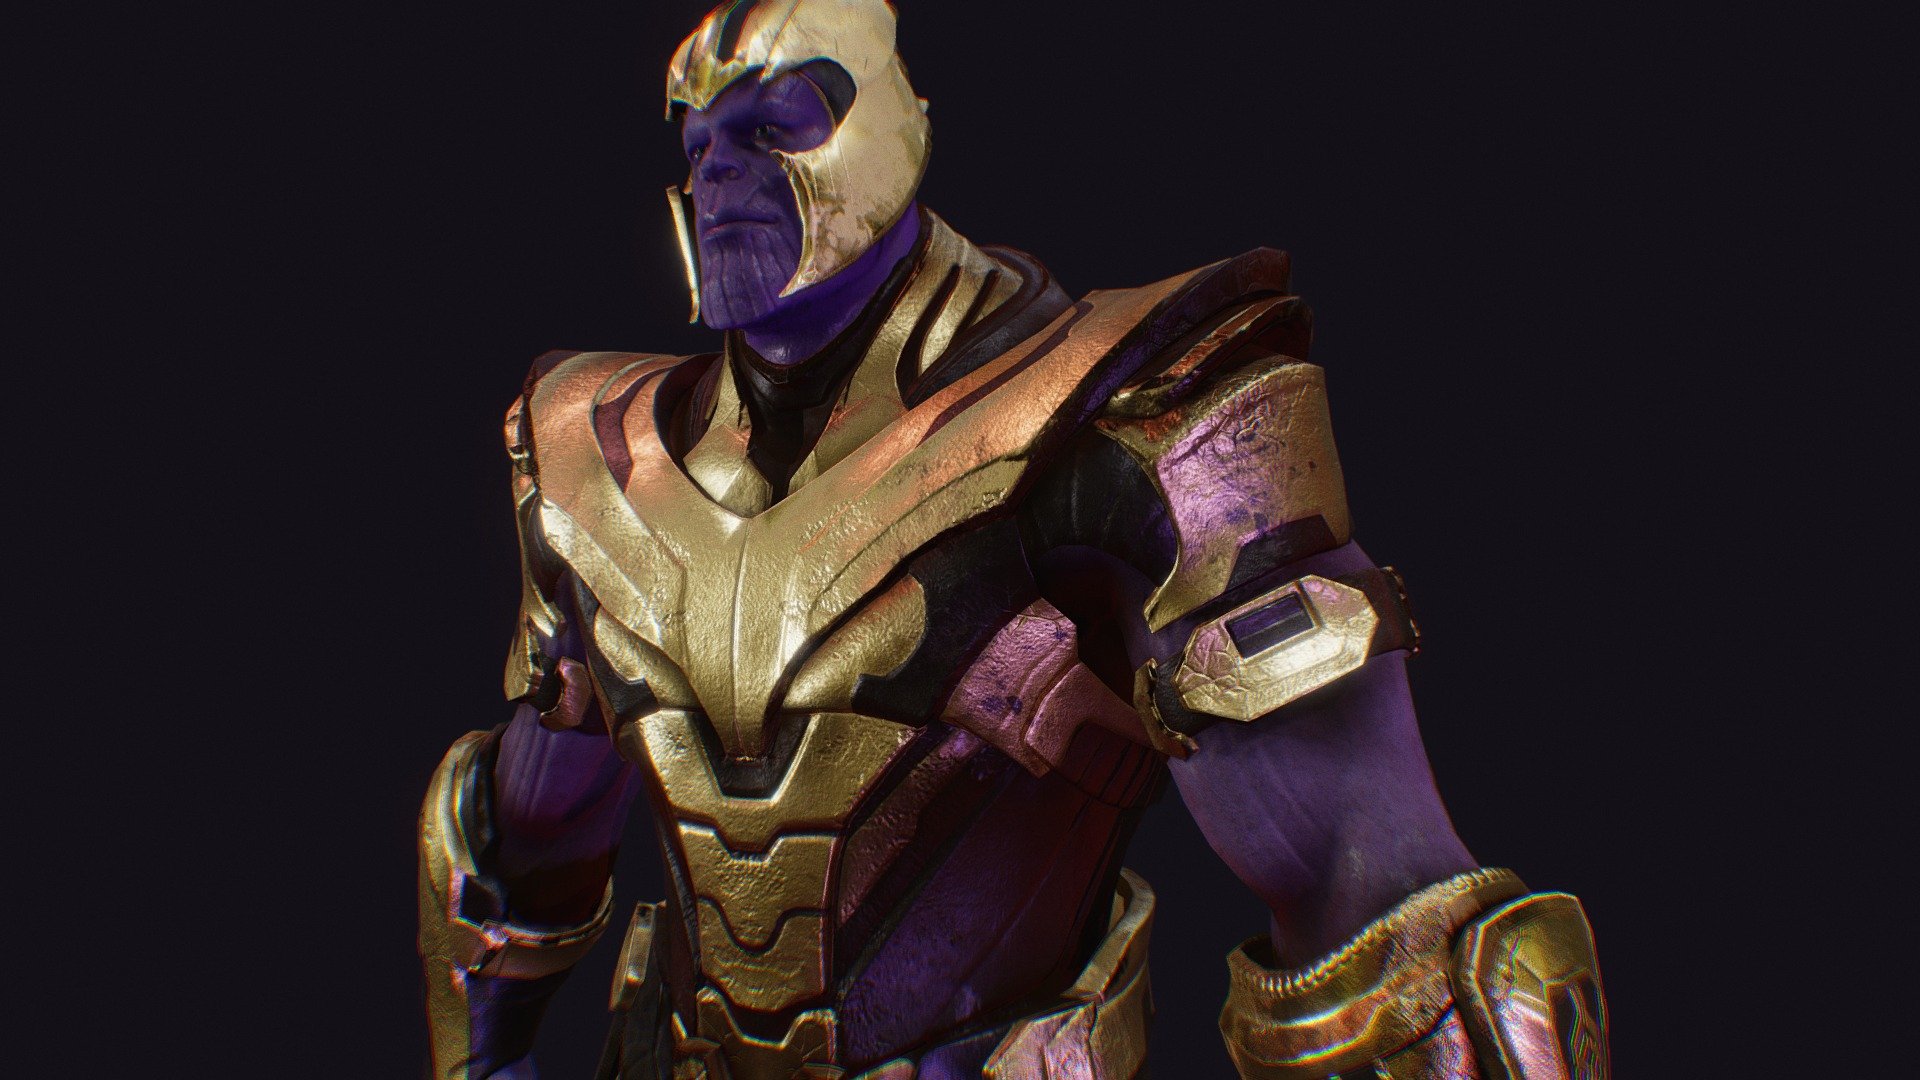 Because the problems reported with the model the download was blocked.
it's just a retexturing job, so I don't know how the model behaves in other programs or game engines.

Marvel Thanos
4K Texture - Thanos 4K Retextured V2 - 3D model by JonnyMANSON 3d model